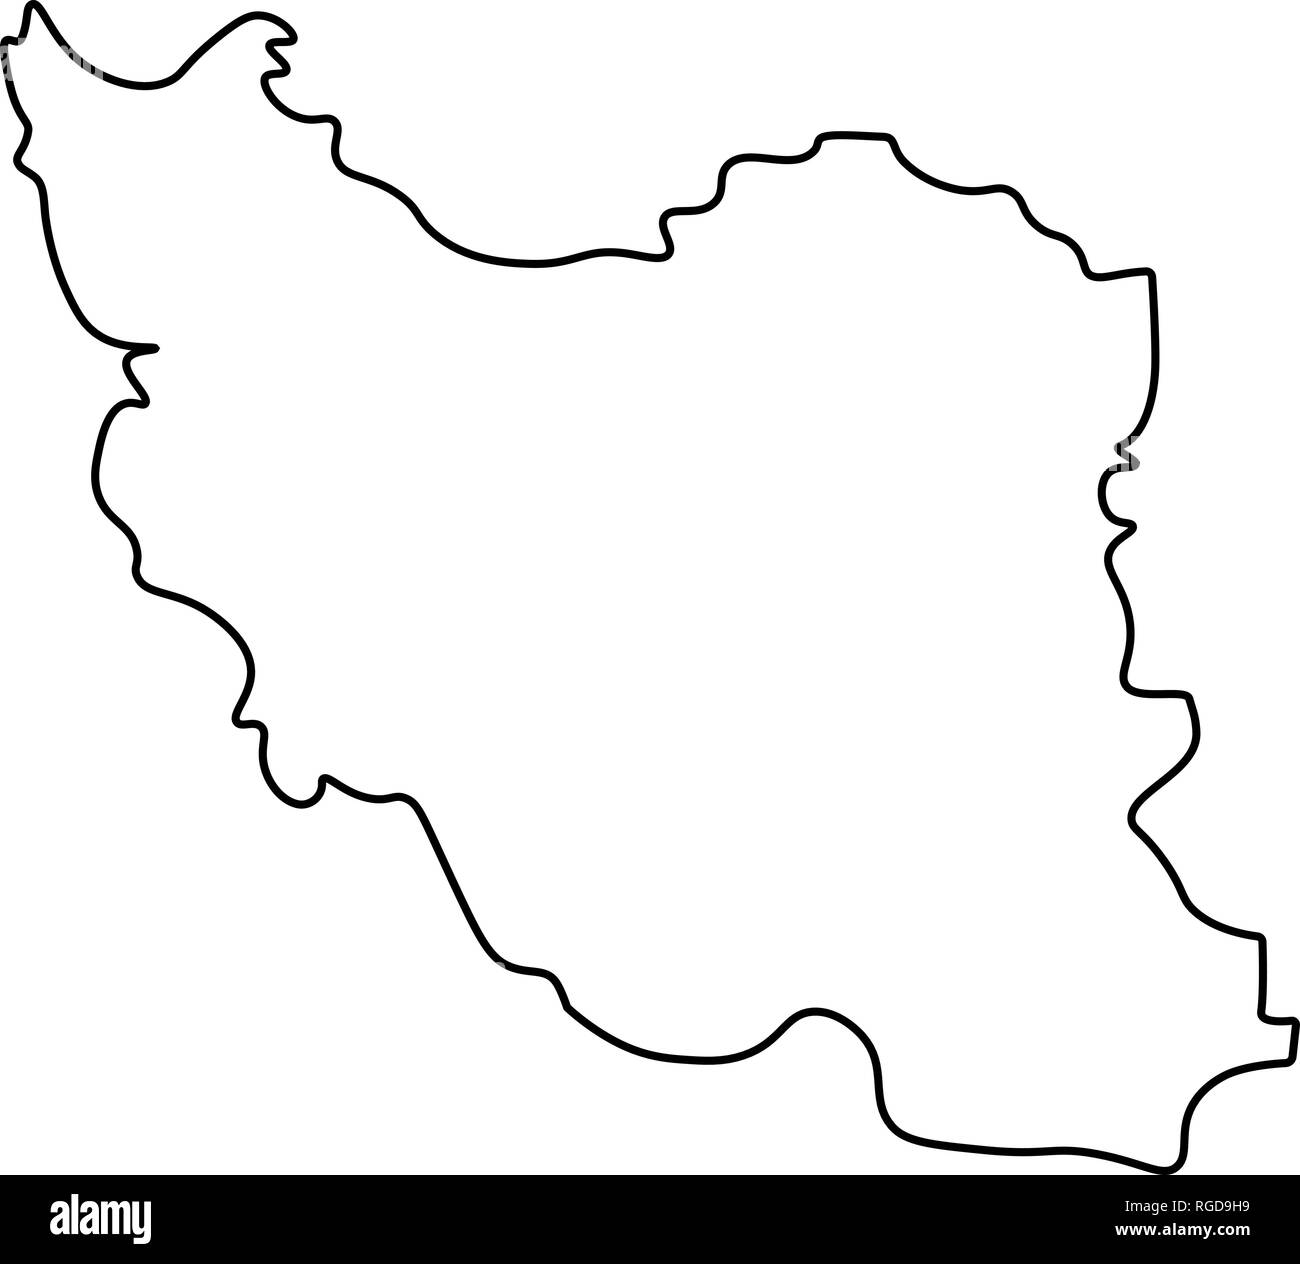 Map of Iran - outline. Silhouette of Iran map vector illustration Stock Vector